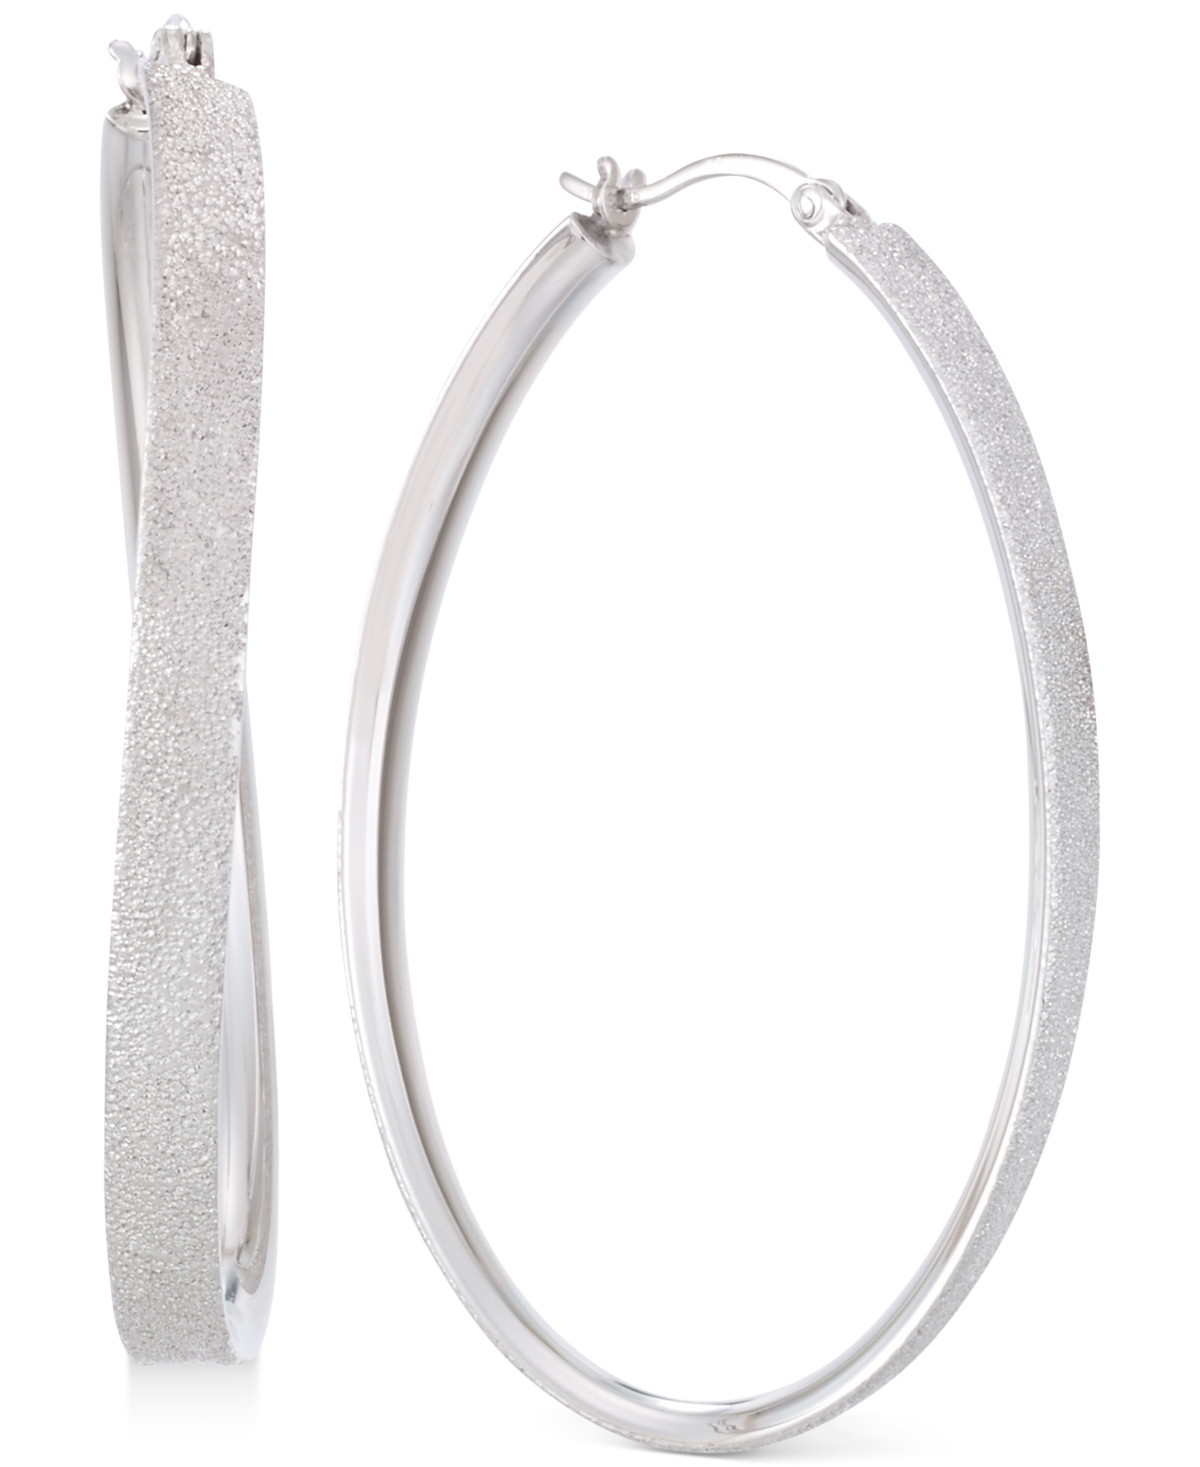 Satin-Finished Hoop Earrings in Platinum over Sterling Silver